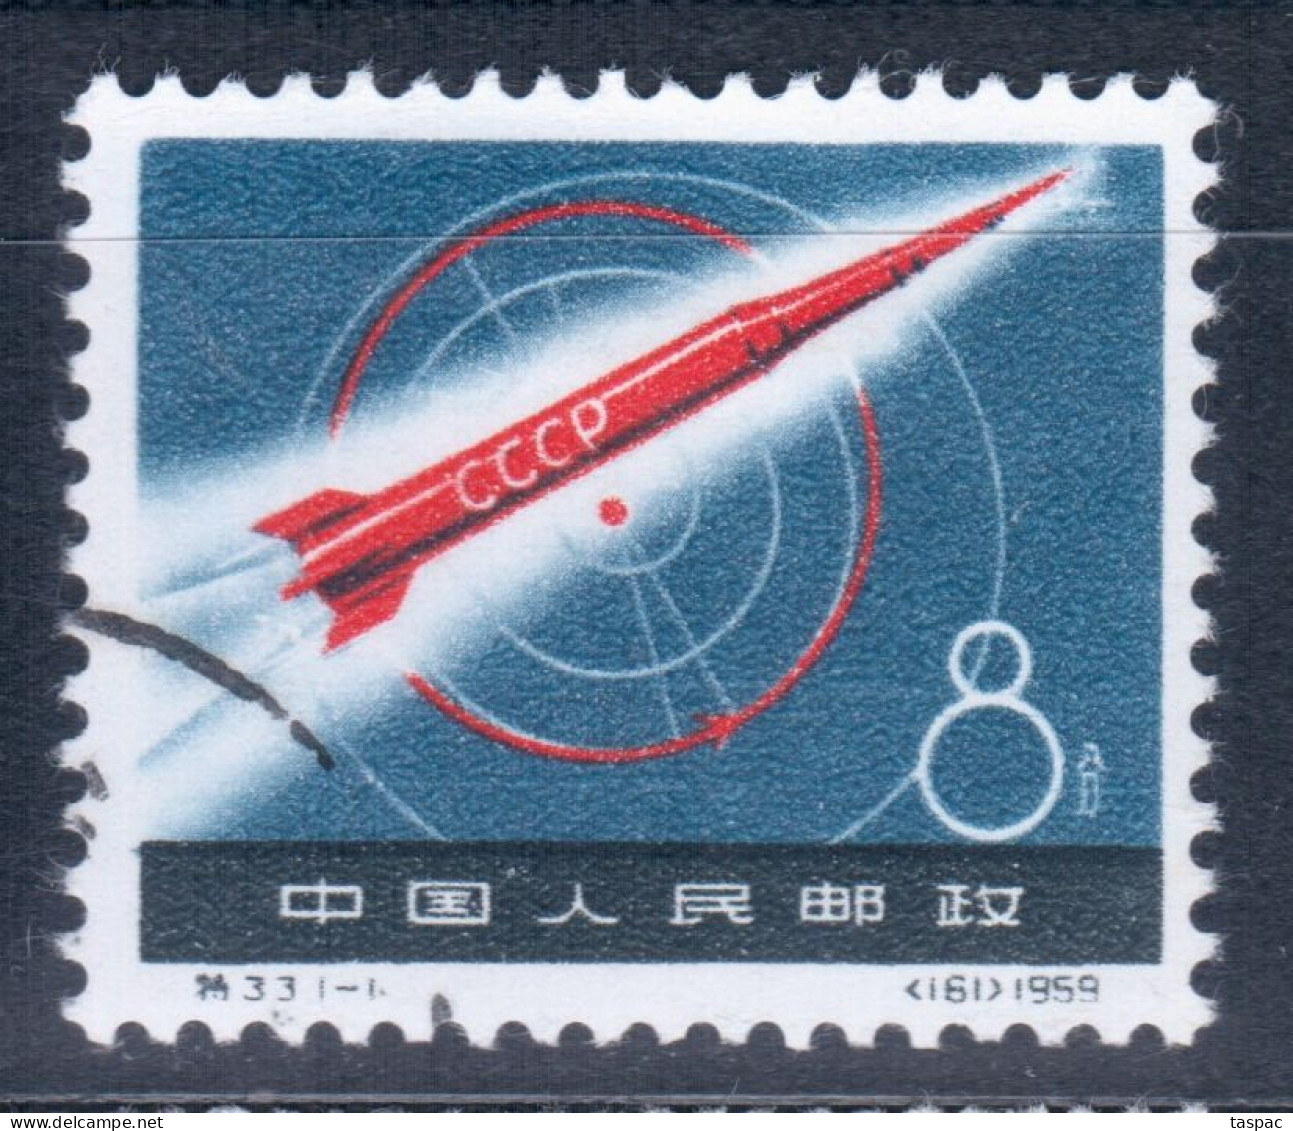 China P.R. 1959 Mi# 453 Used - Launching Of First Russian Space Rocket - Gebruikt